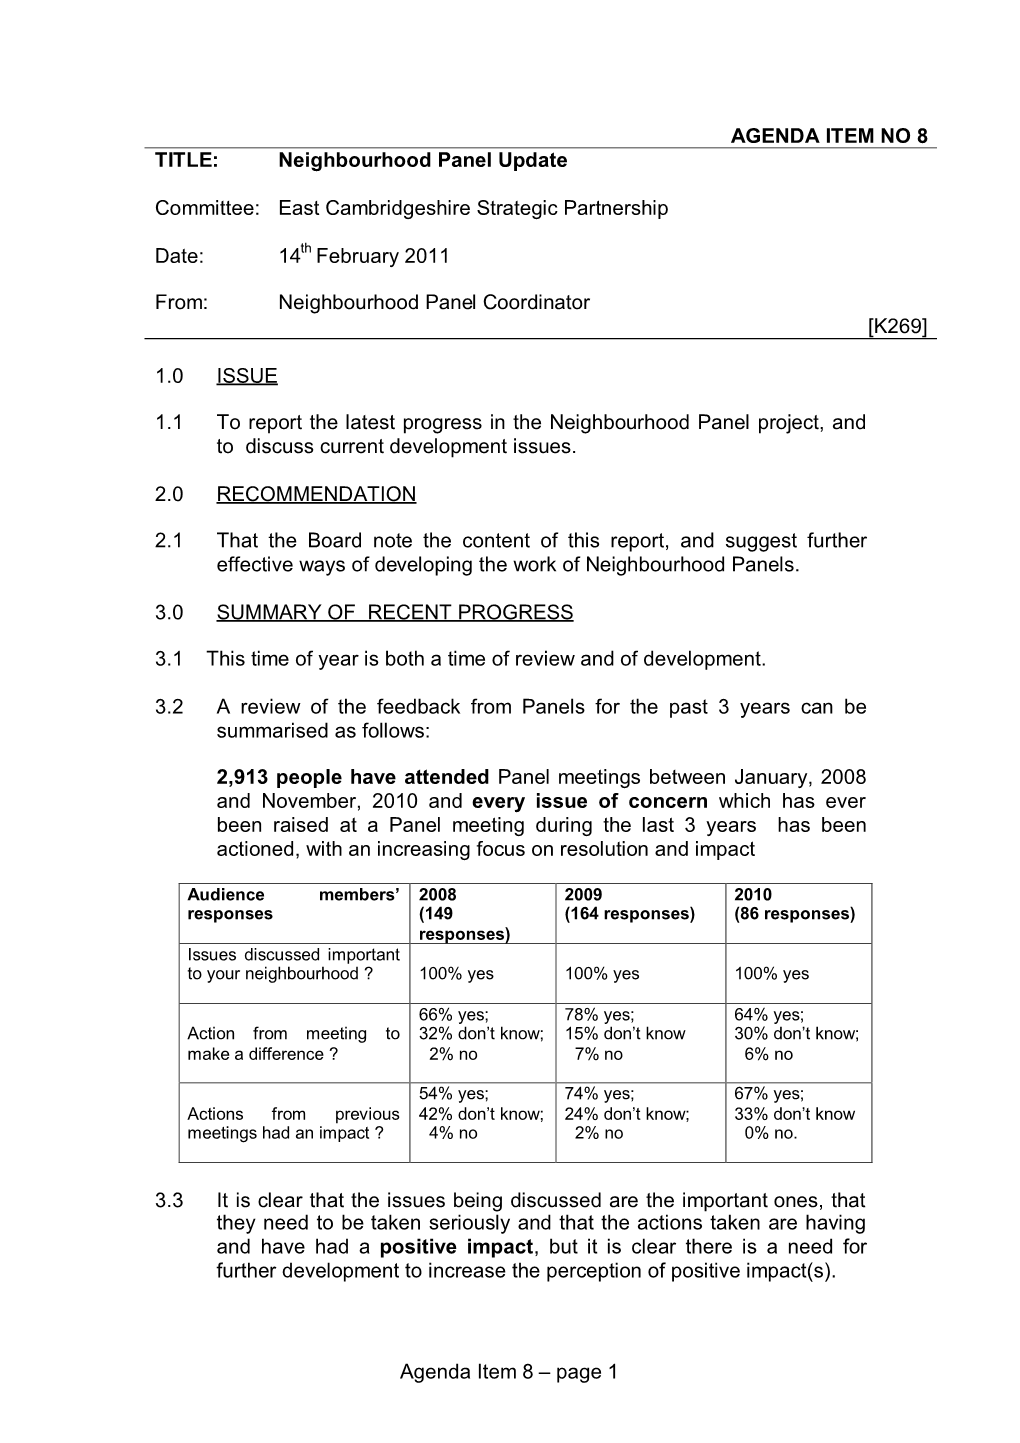 Agenda Item 8 – Page 1 3.4 Panel Members, Although Some Were Initially Sceptical, Are Positive Too